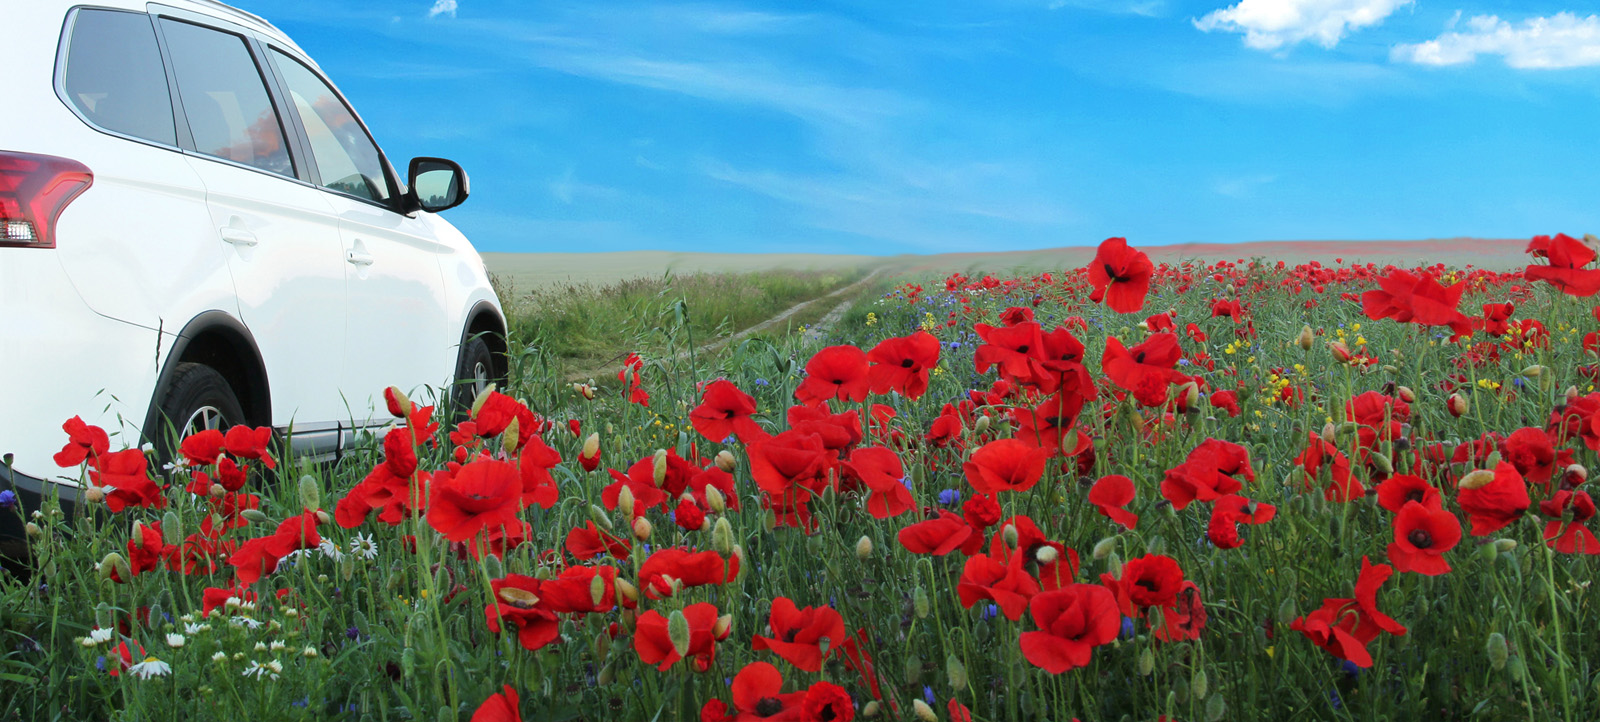 Car driving through a field of flowers